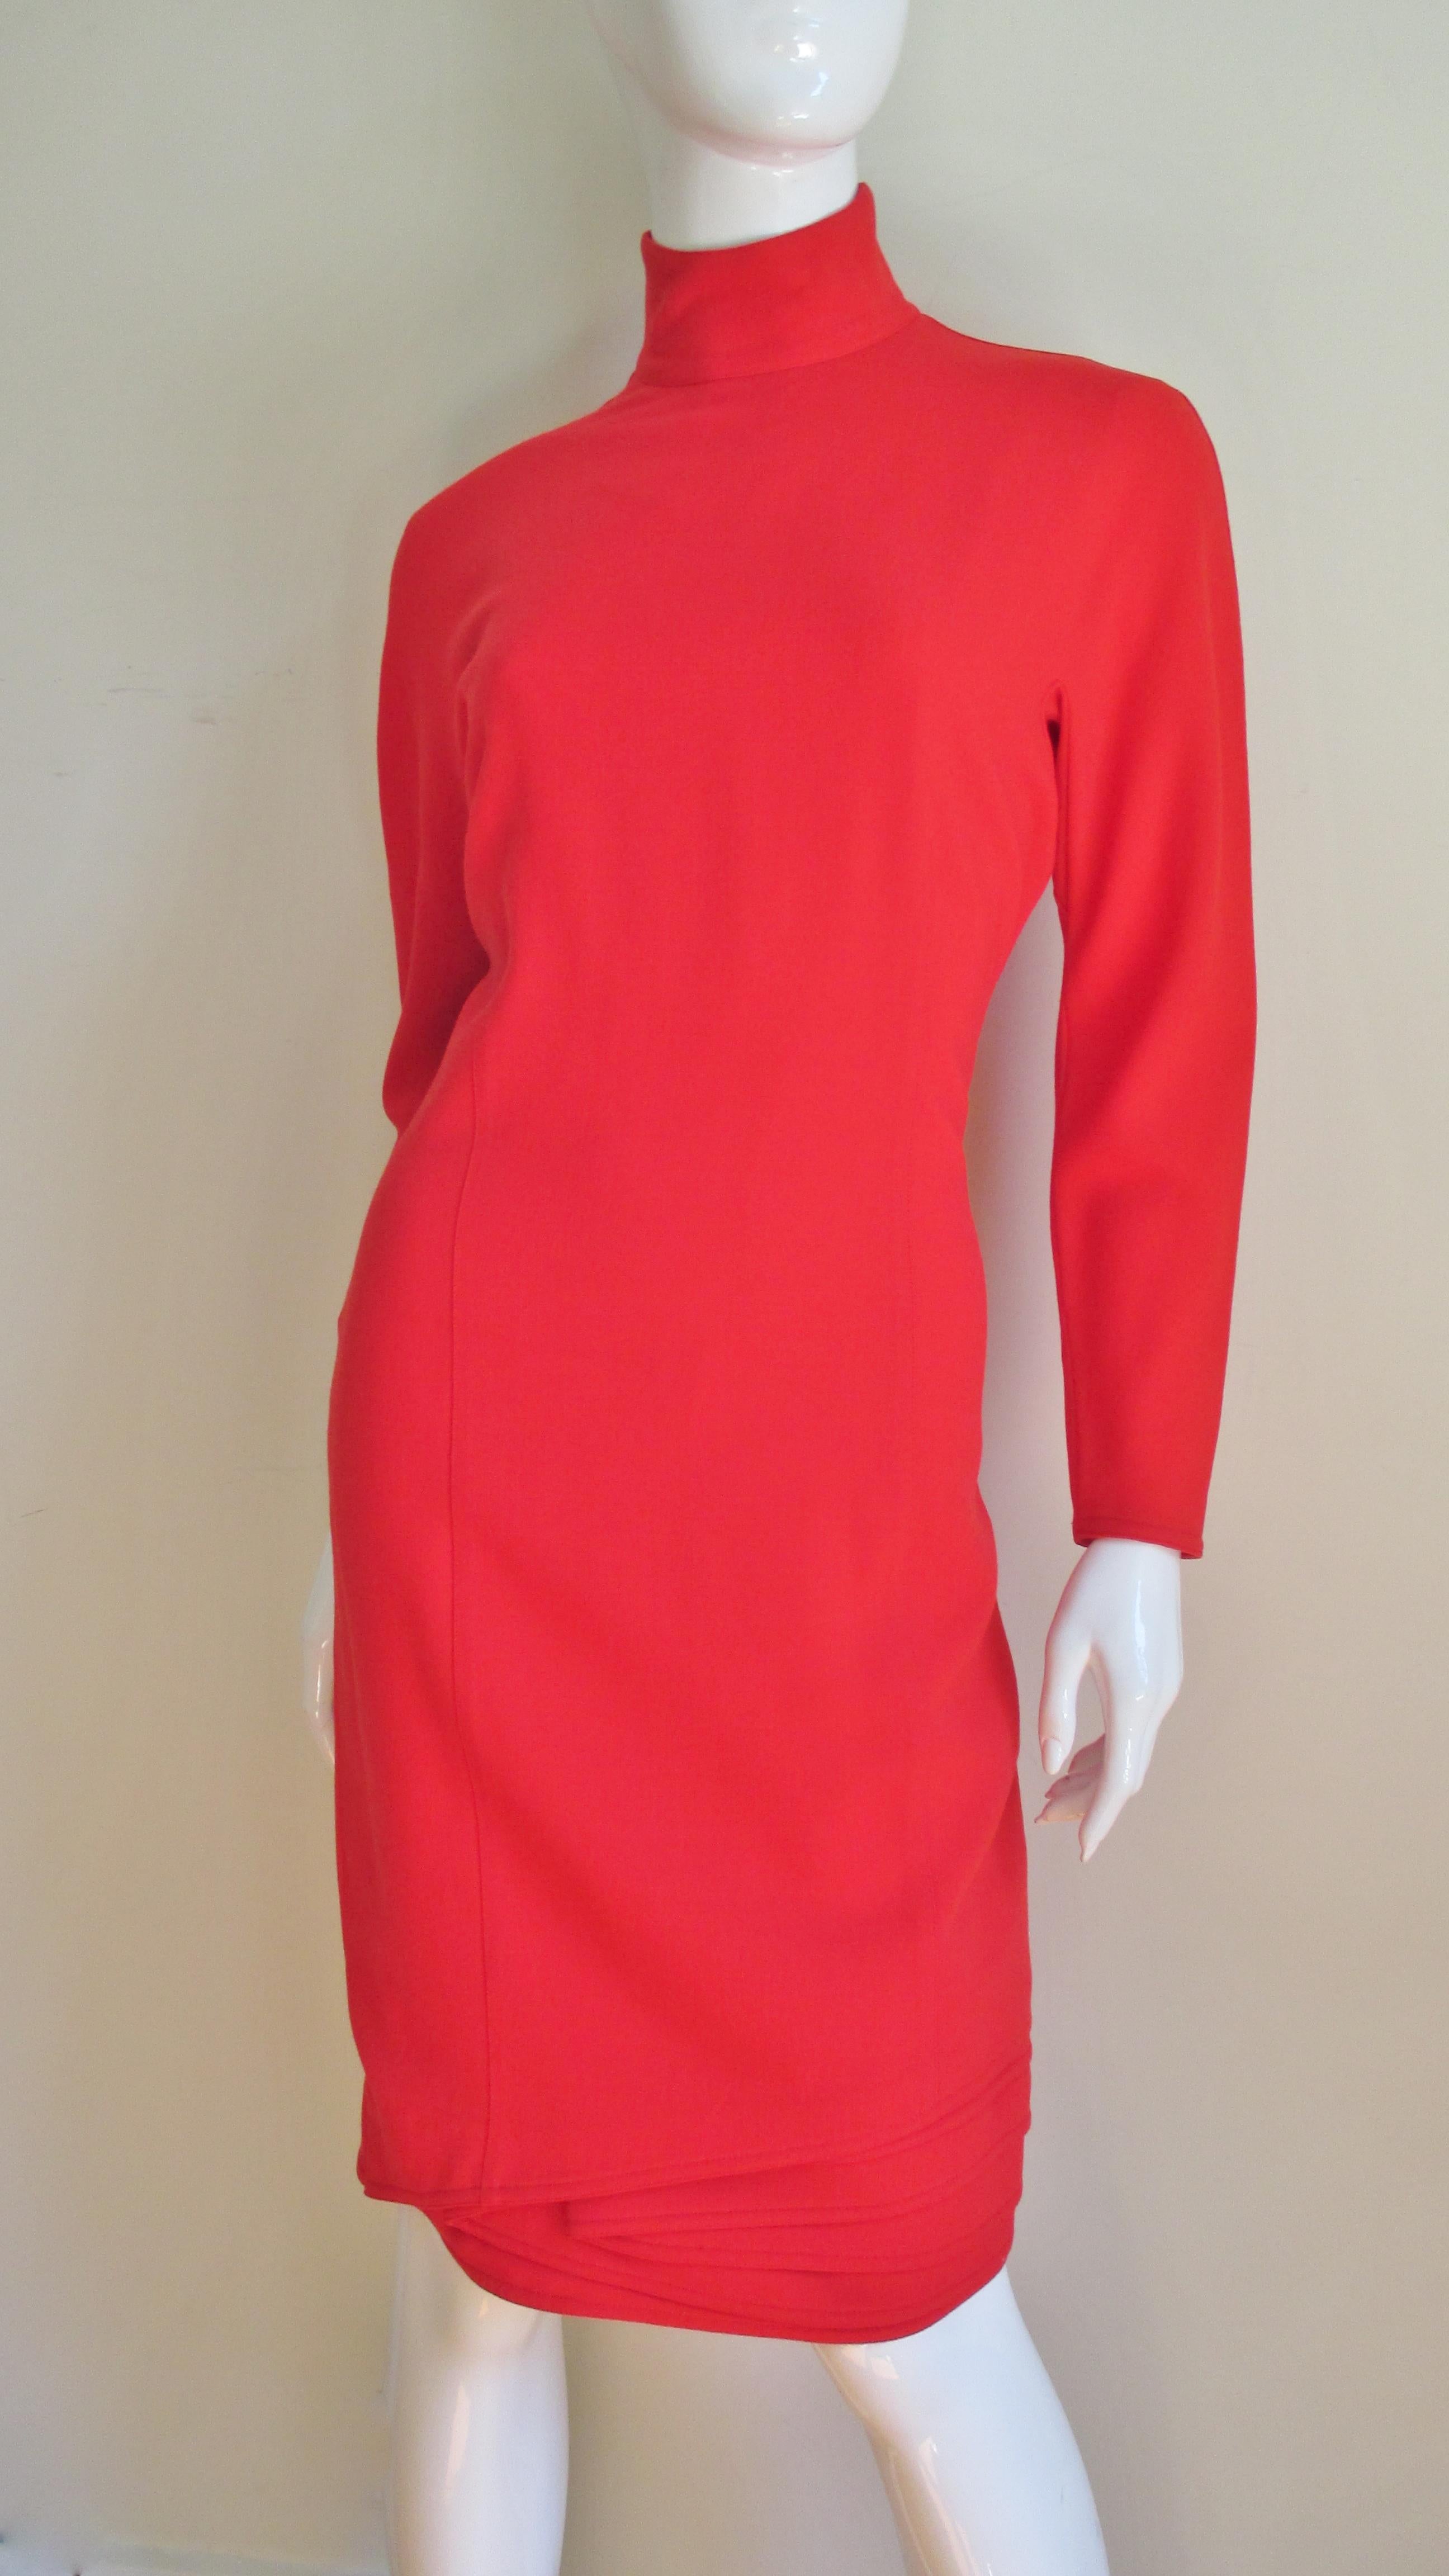 A fabulous lightweight orange wool dress by Gianni Versace.  It is semi fitted with a stand up collar, subtle long dolman sleeves and intricate layers of angled folds at the hemline front and back. it is lined in matching silk and has a center back